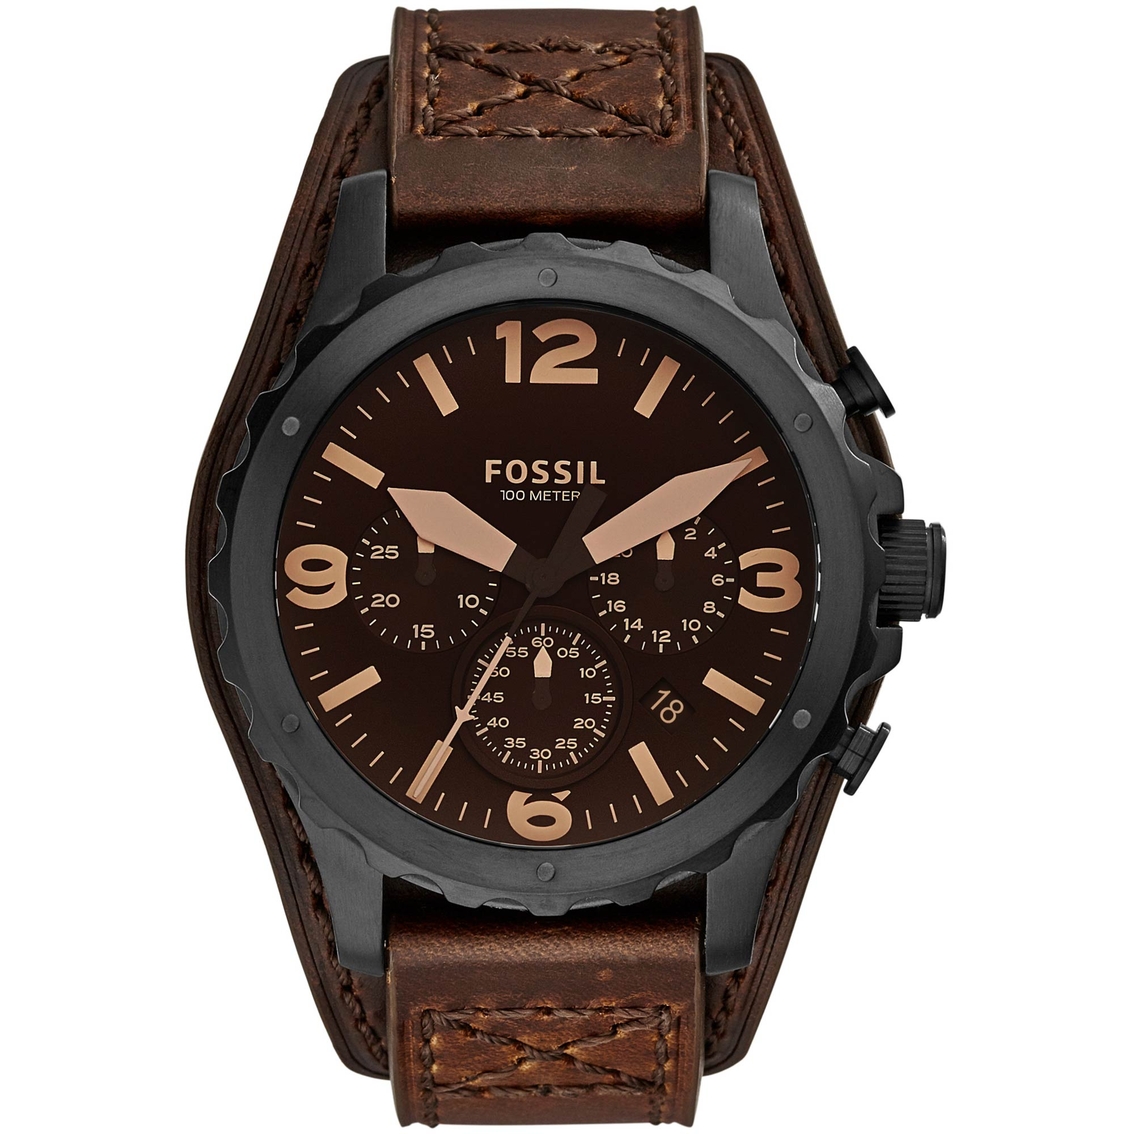 Fossil Men's Nate Chronograph Dark Brown Leather Watch Jr1511 | Leather ...